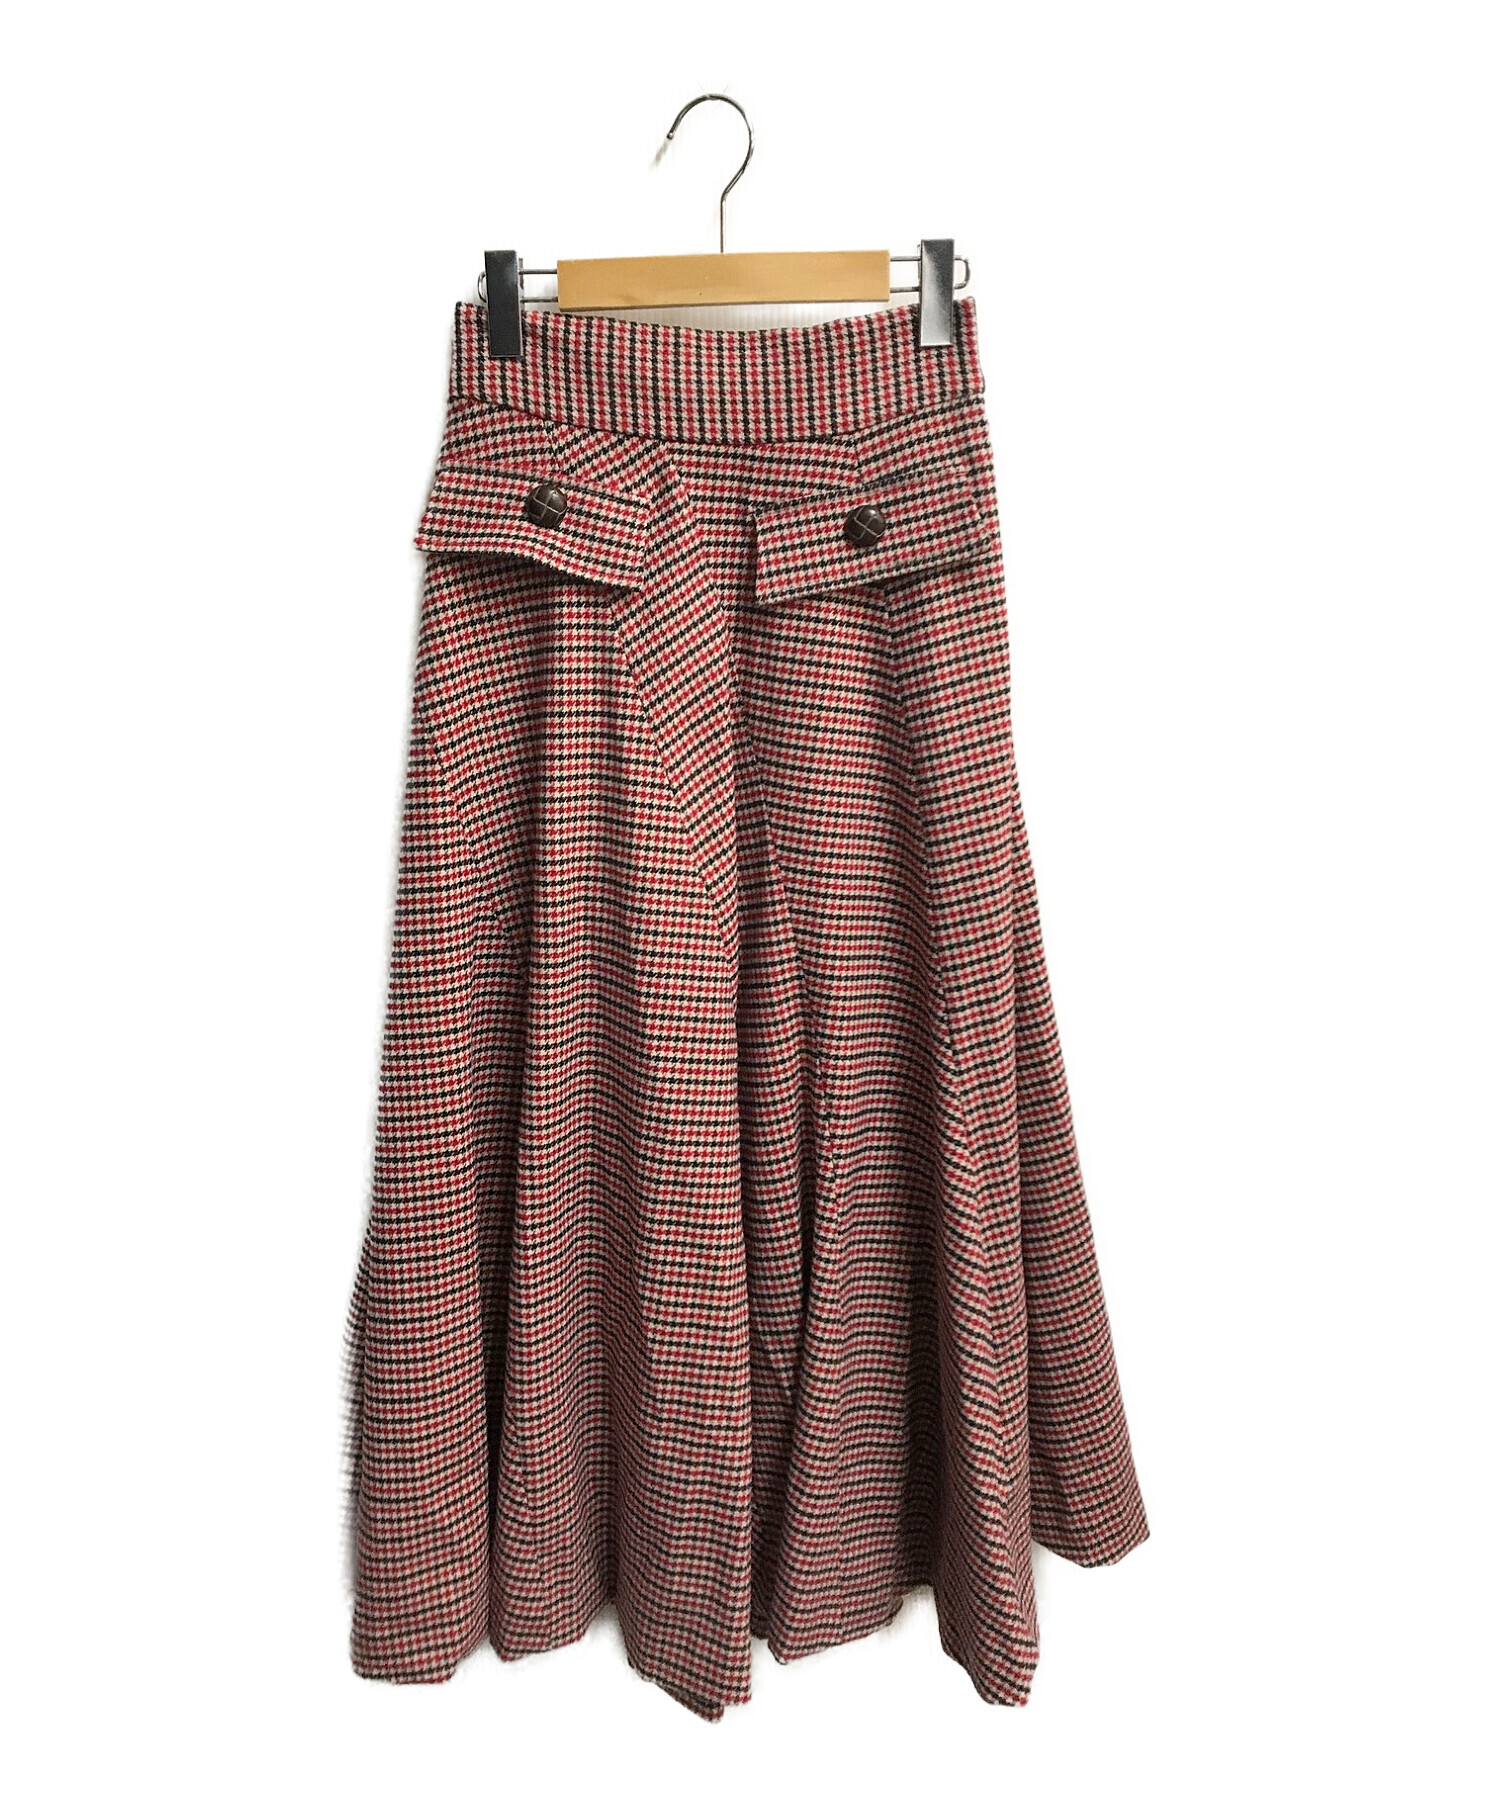 Her lip to High-rise Shell Checked Skirt